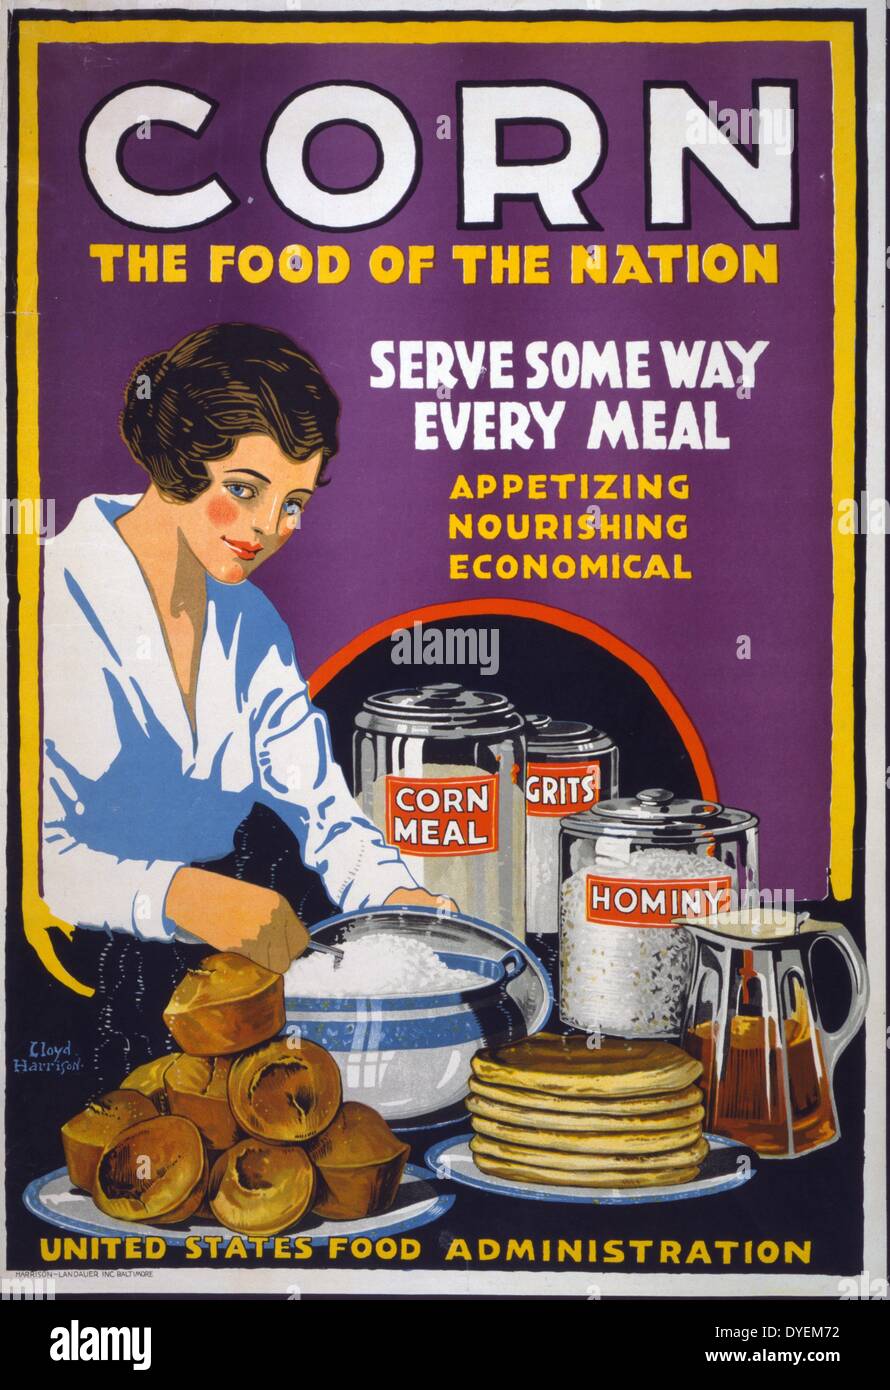 Corn - the food of the nation Serve some way every meal - appetizing, nourishing, economical [1918]. World War I American propaganda poster showing a woman serving muffins, pancakes, and grits, with canisters on the table labelled corn meal, grits, and hominy. Stock Photo